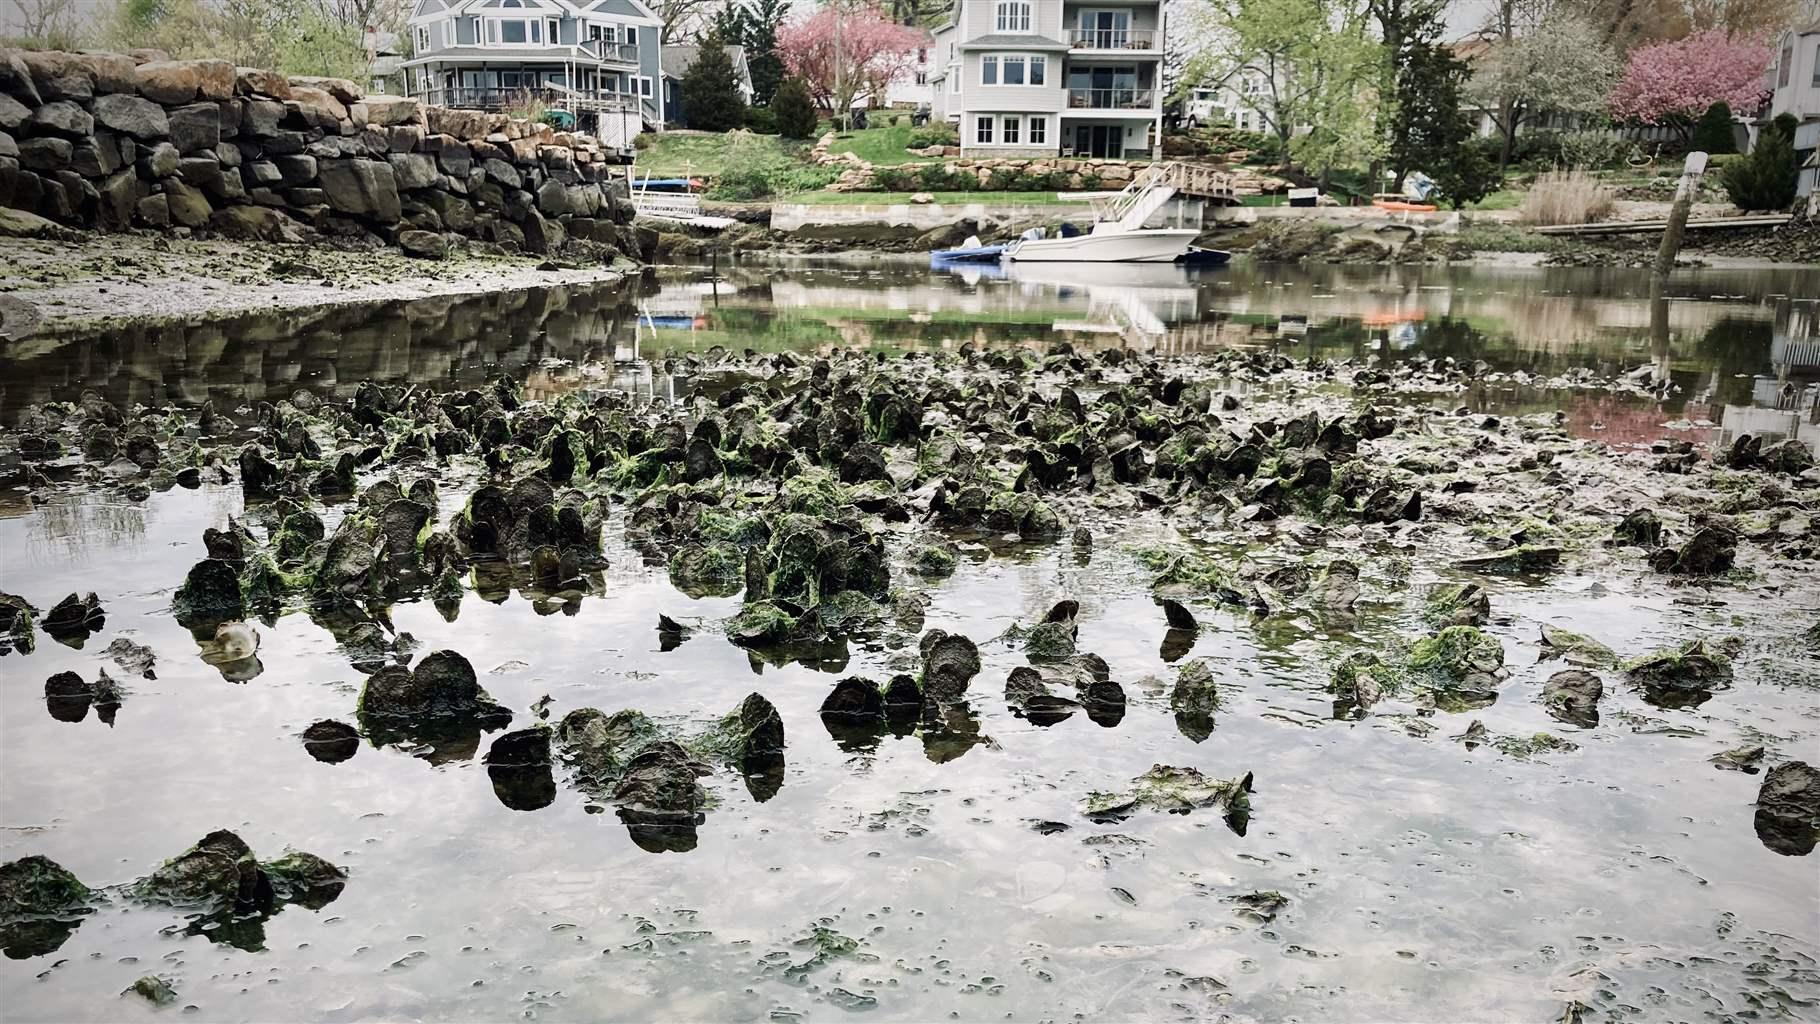 Wild oysters grow in Farm River within view of homes in East Haven, Connecticut.